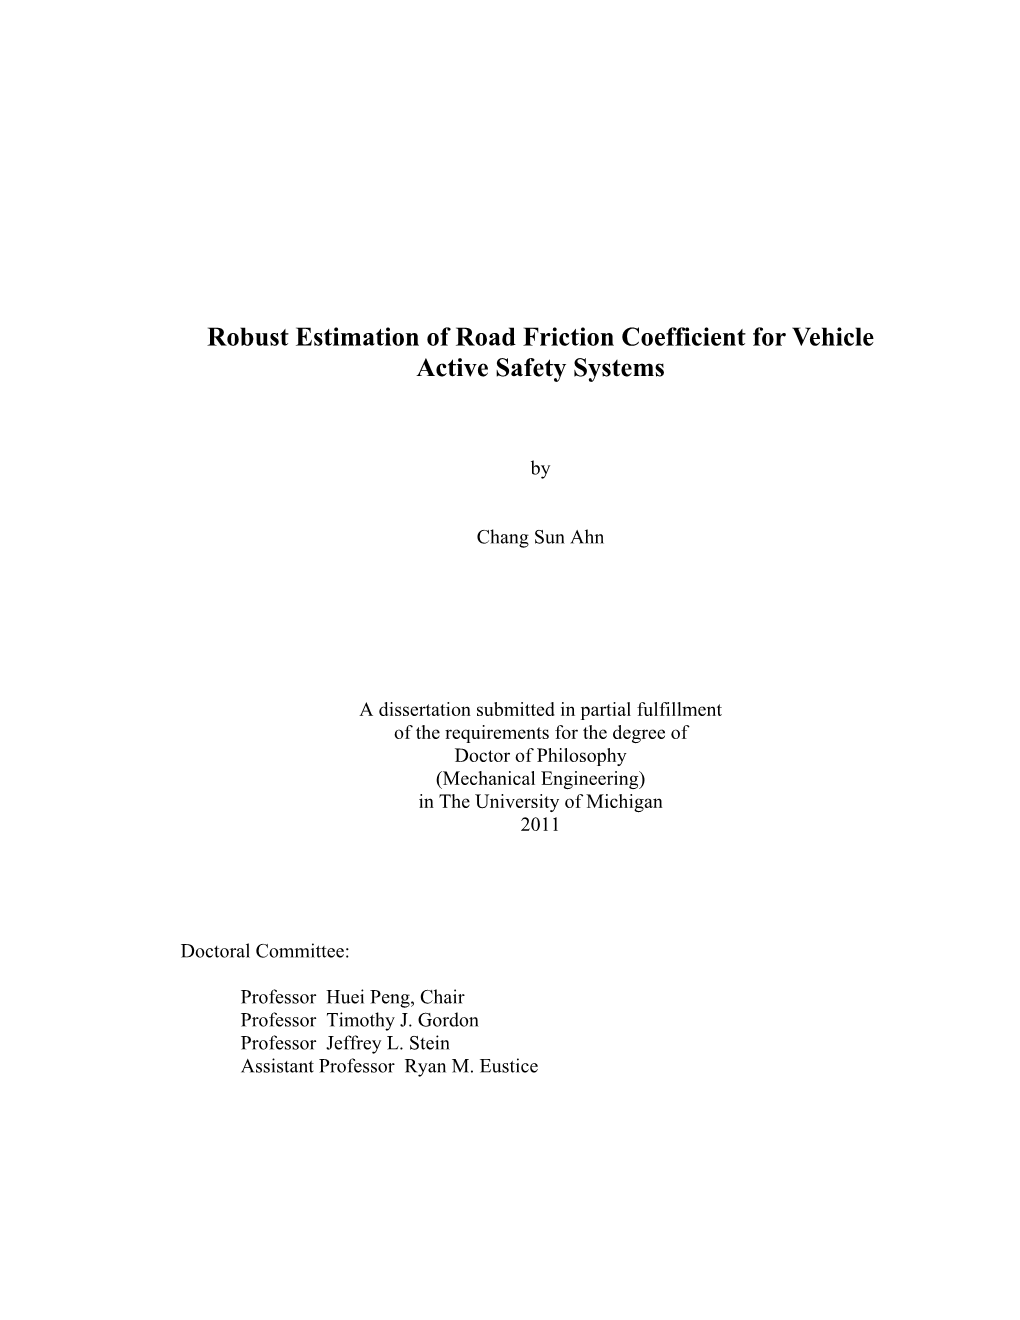 Robust Estimation of Road Friction Coefficient for Vehicle Active Safety Systems